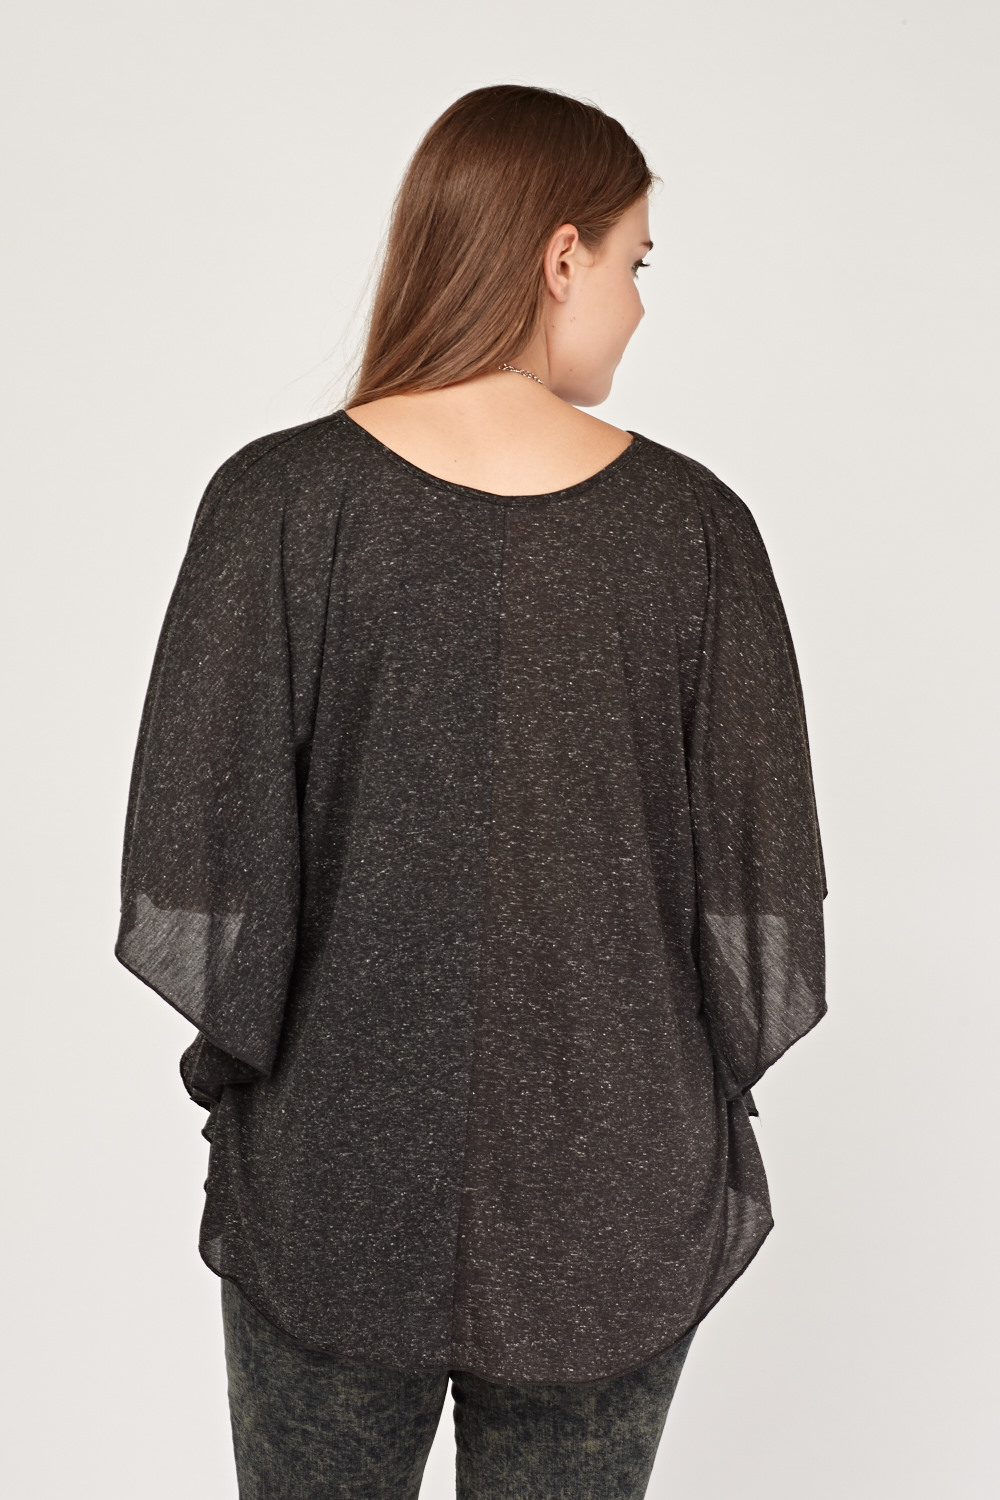 Circular Sleeve Speckled Top - Just $7